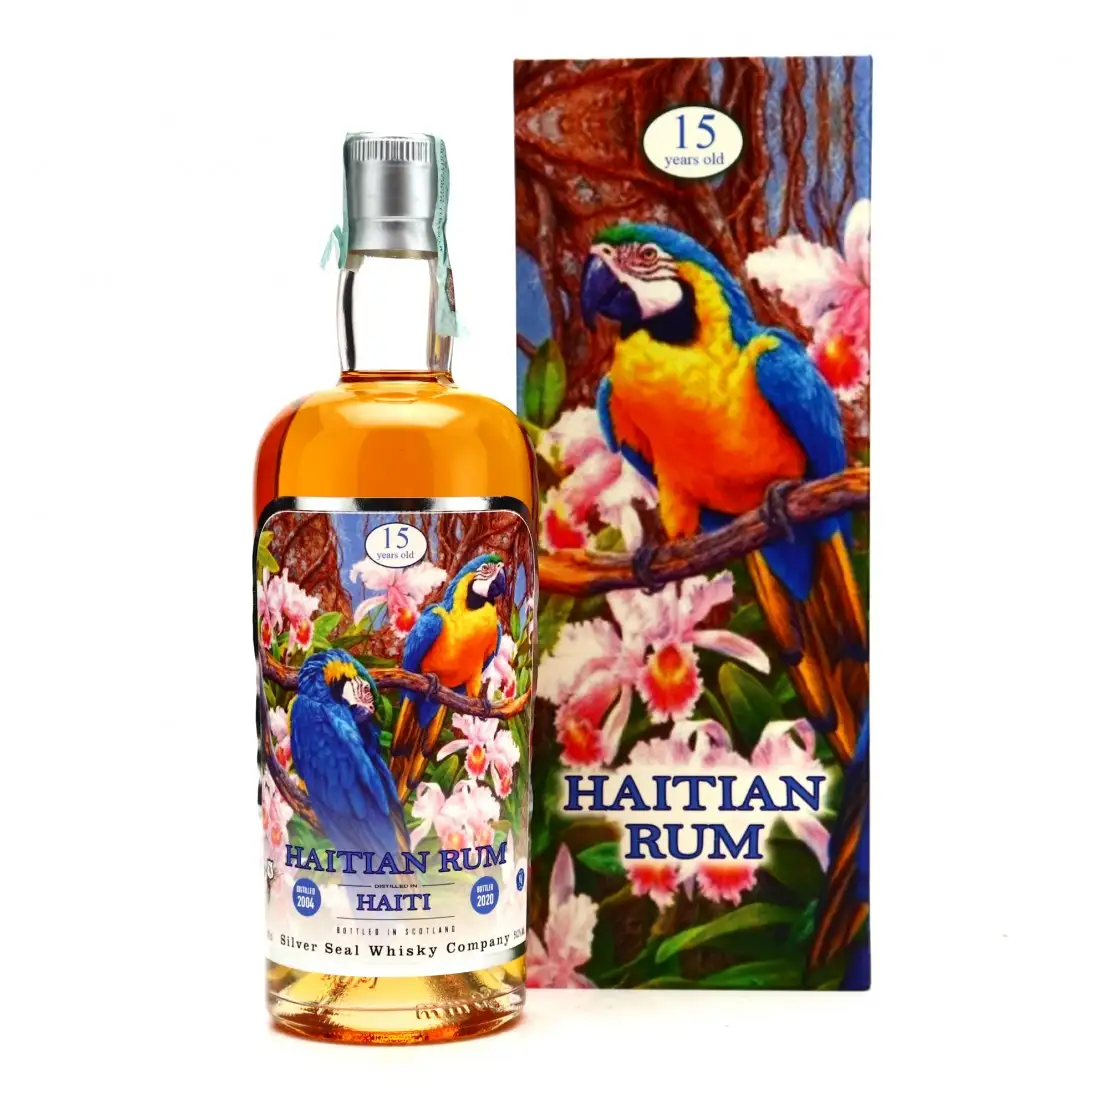 Image of the front of the bottle of the rum Haitian Rum